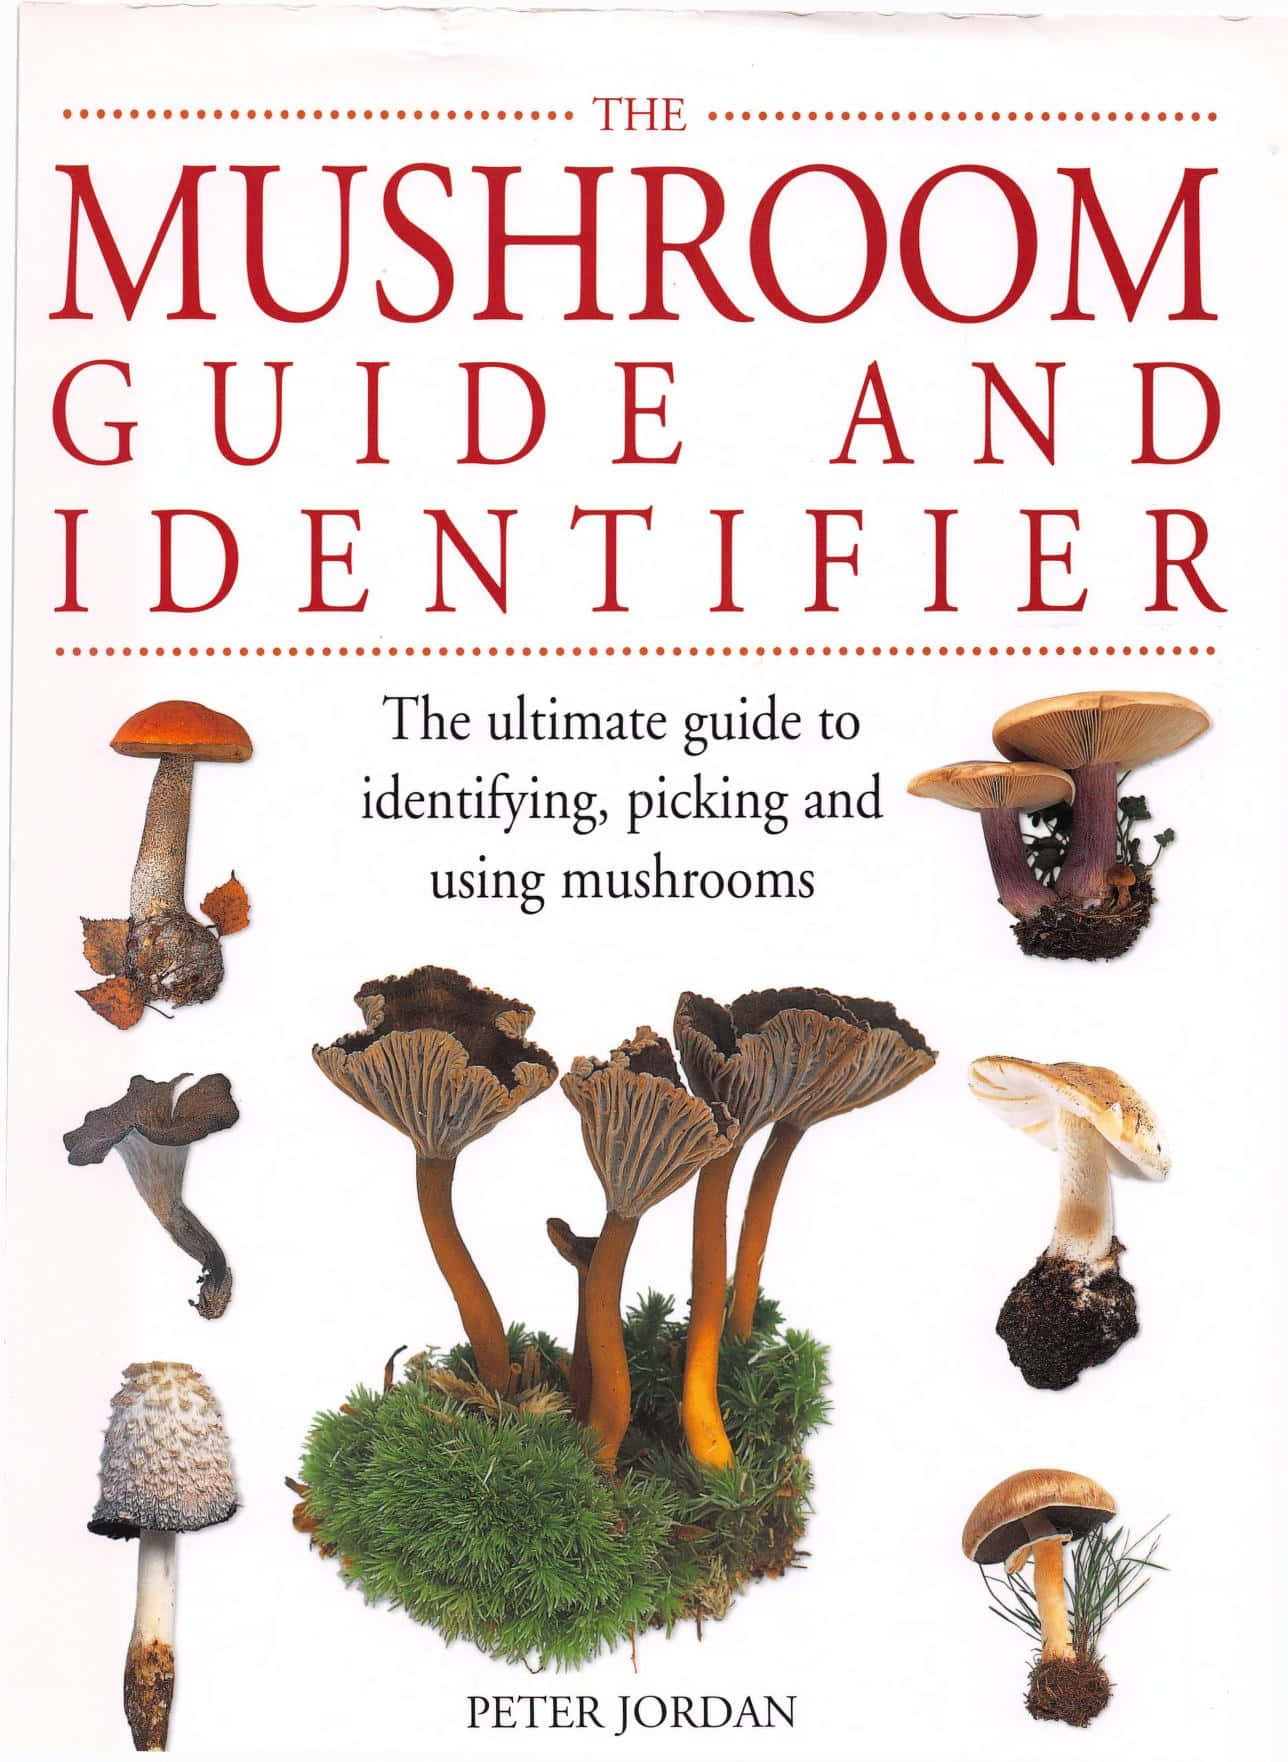 Knowing mushroom identification can help you recognize the plethora of edible options available.